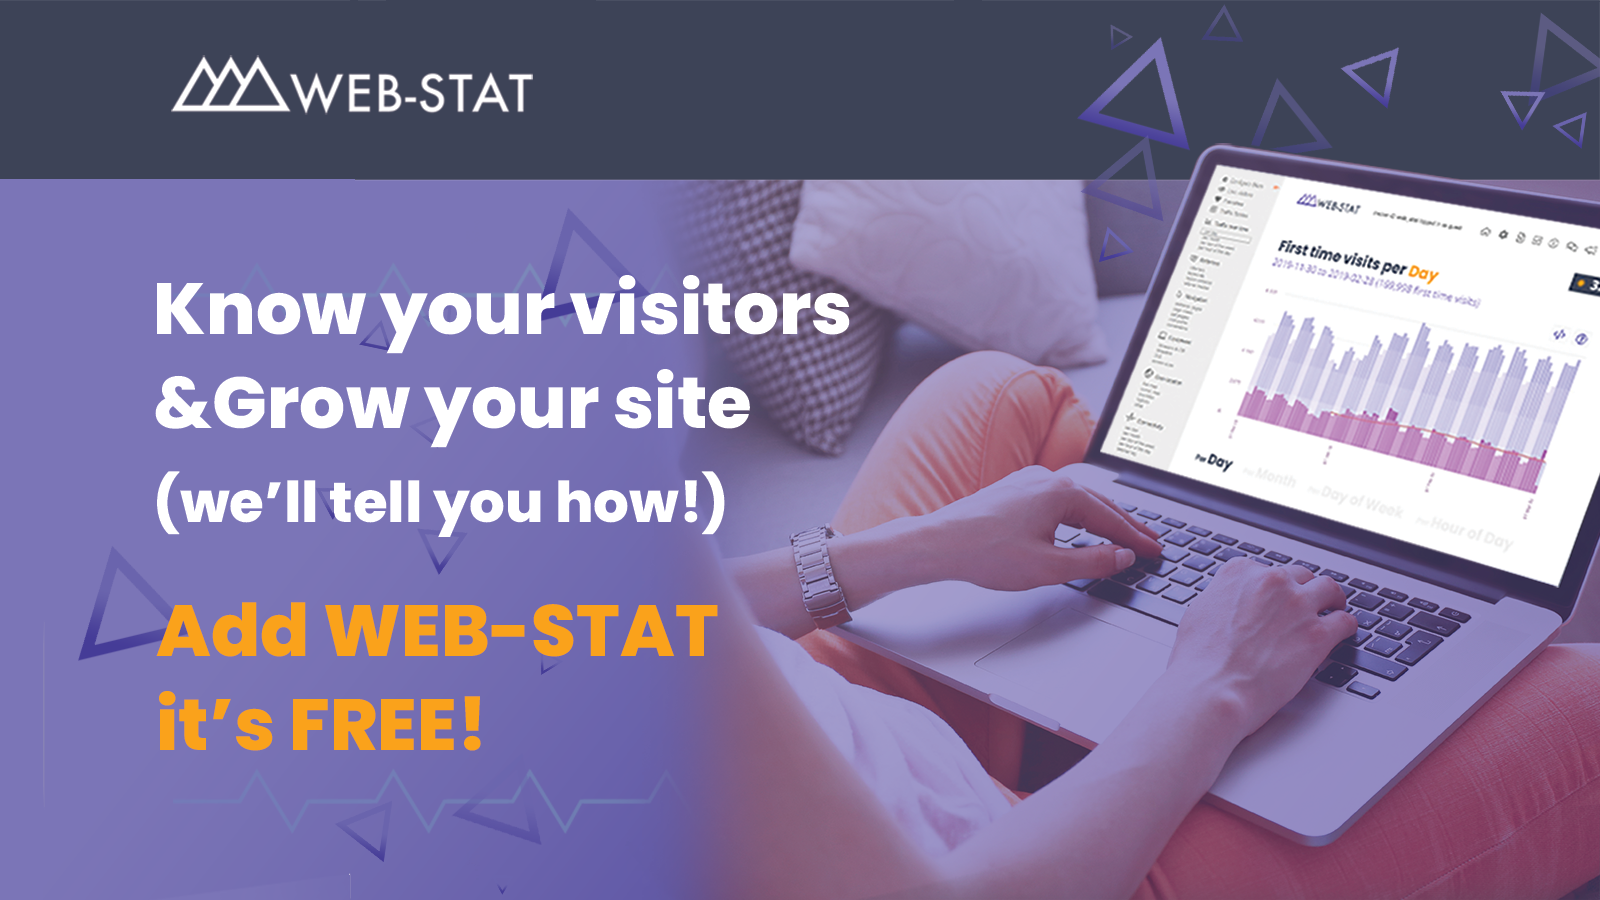 Make your site the best it can be!